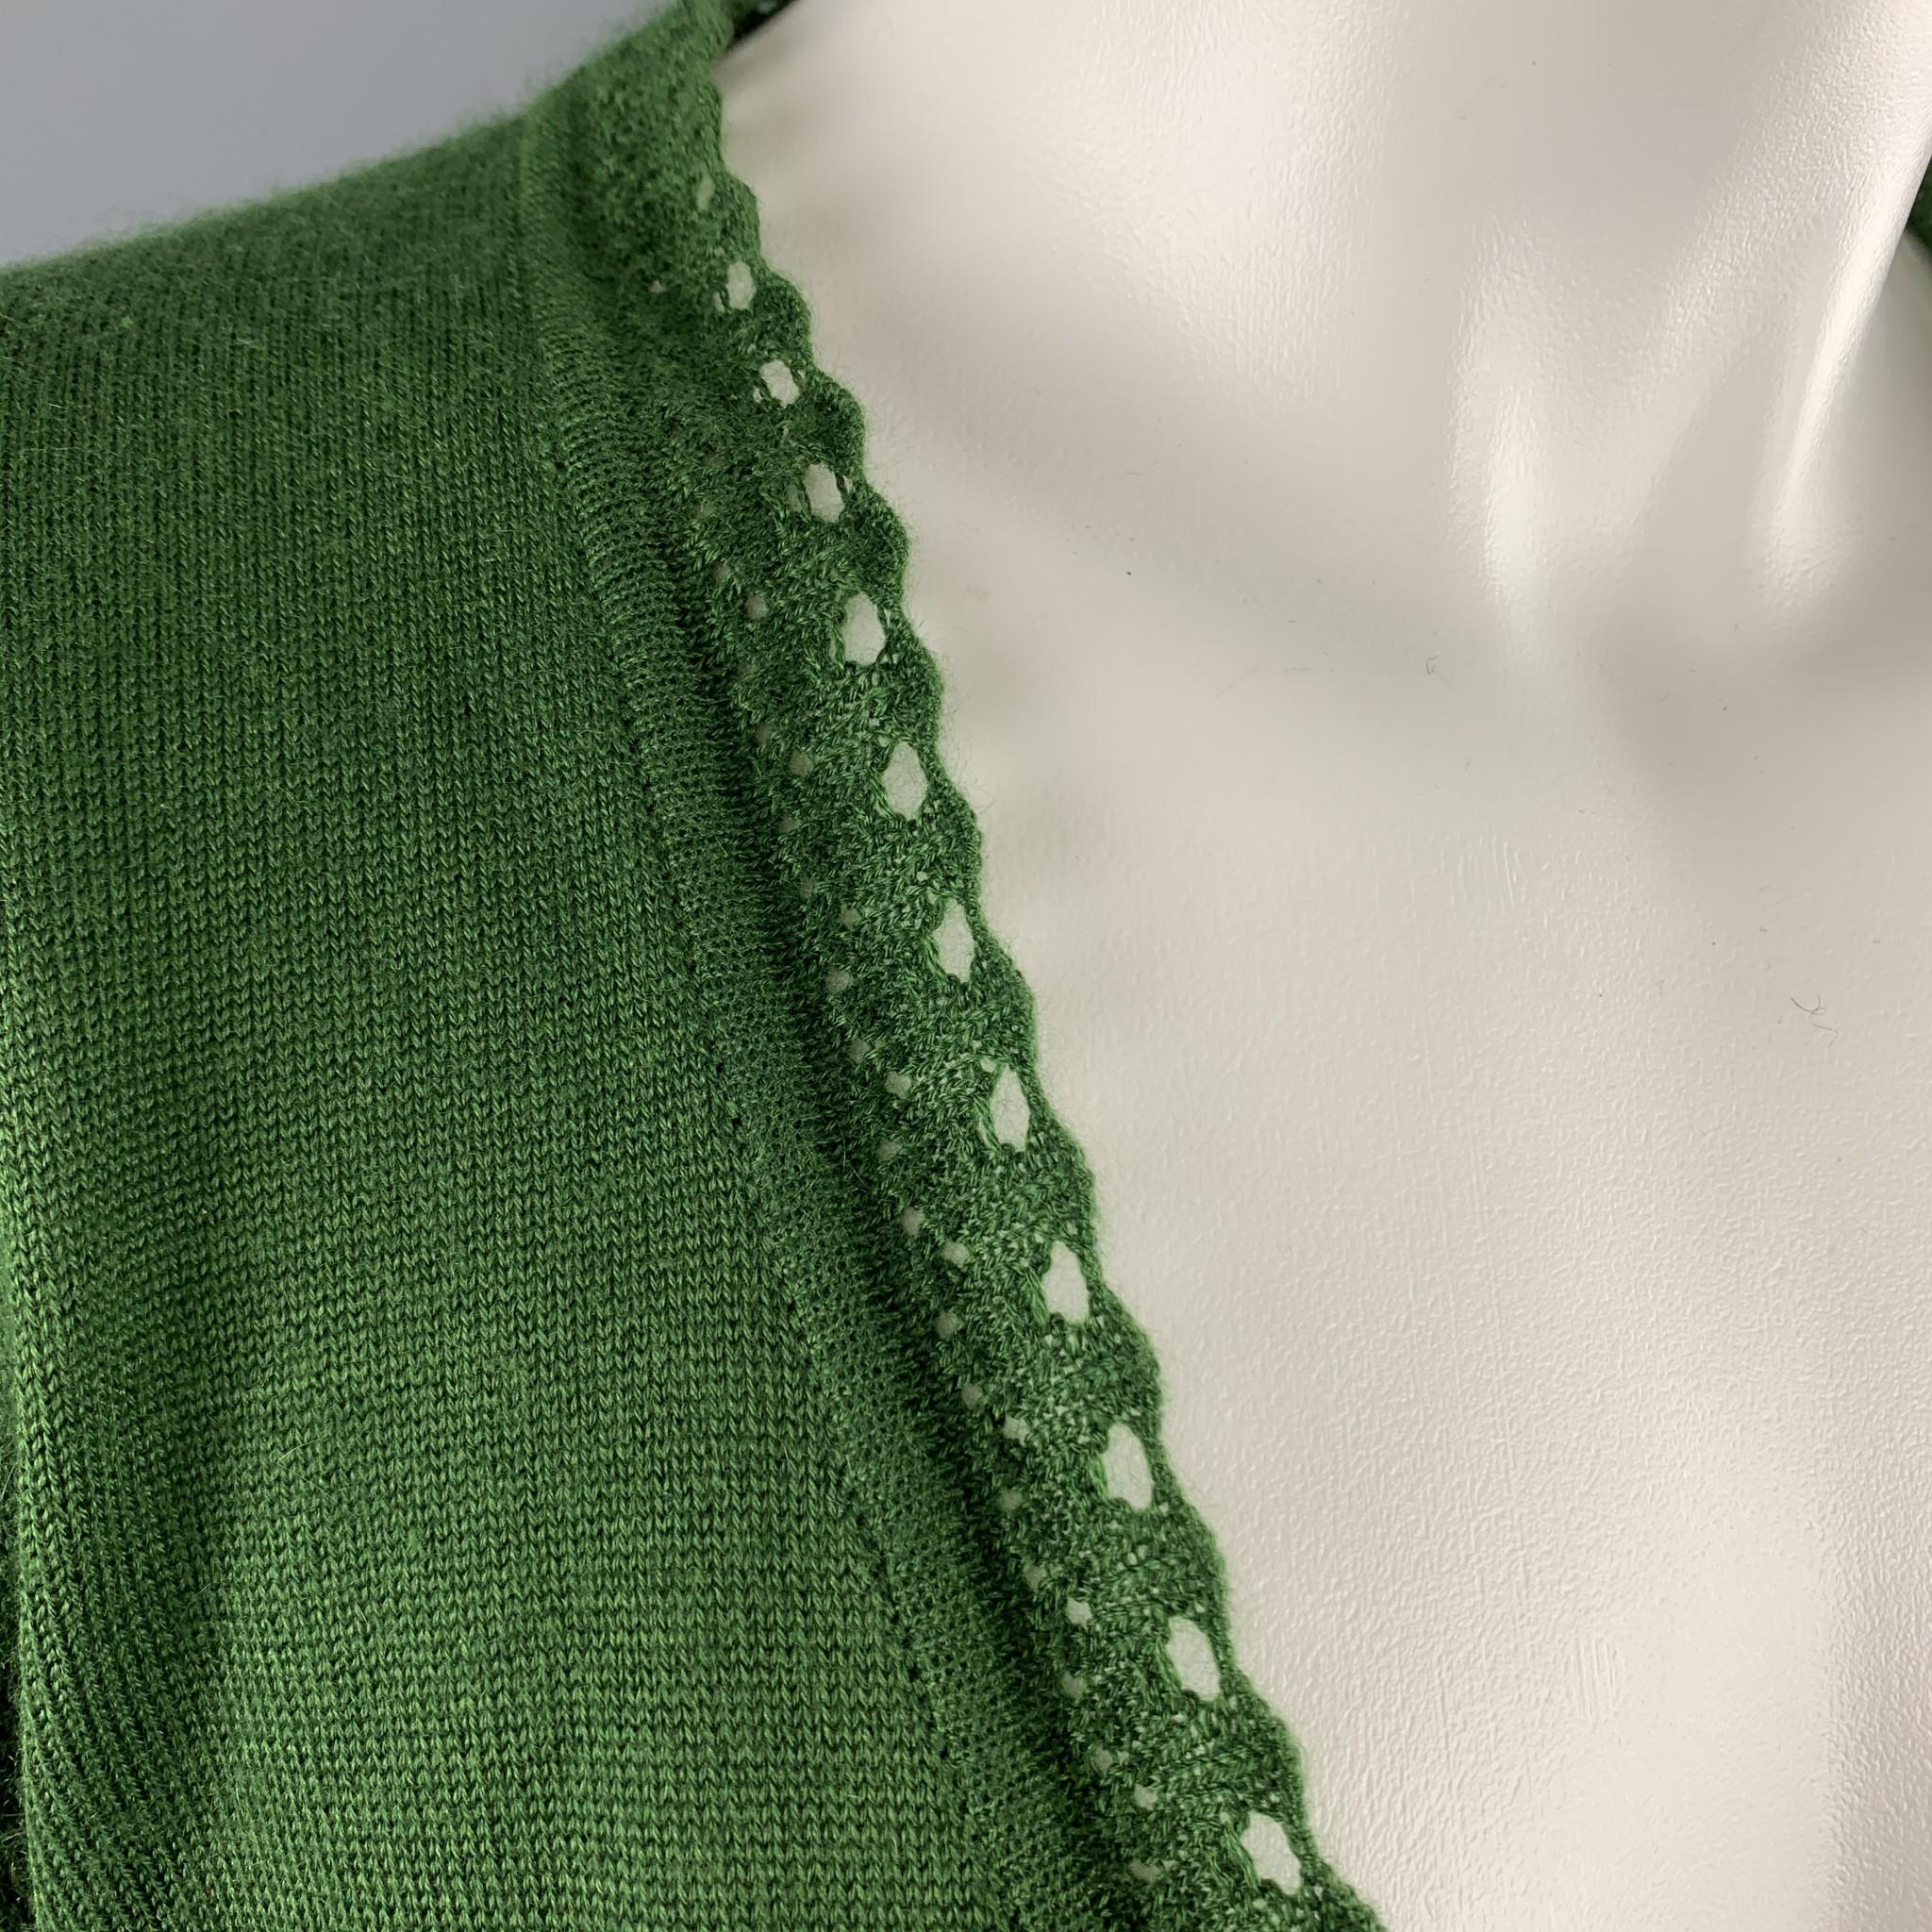 OSCAR DE LA RENTA cropped bolero cardigan comes in green cashmere silk blend knit with an open front and lace trim. Wear throughout. As-is. Made in italy.

Good Pre-Owned Condition.
Marked: M

Measurements:

Shoulder: 14.5 in.
Bust: 36 in.
Sleeve: